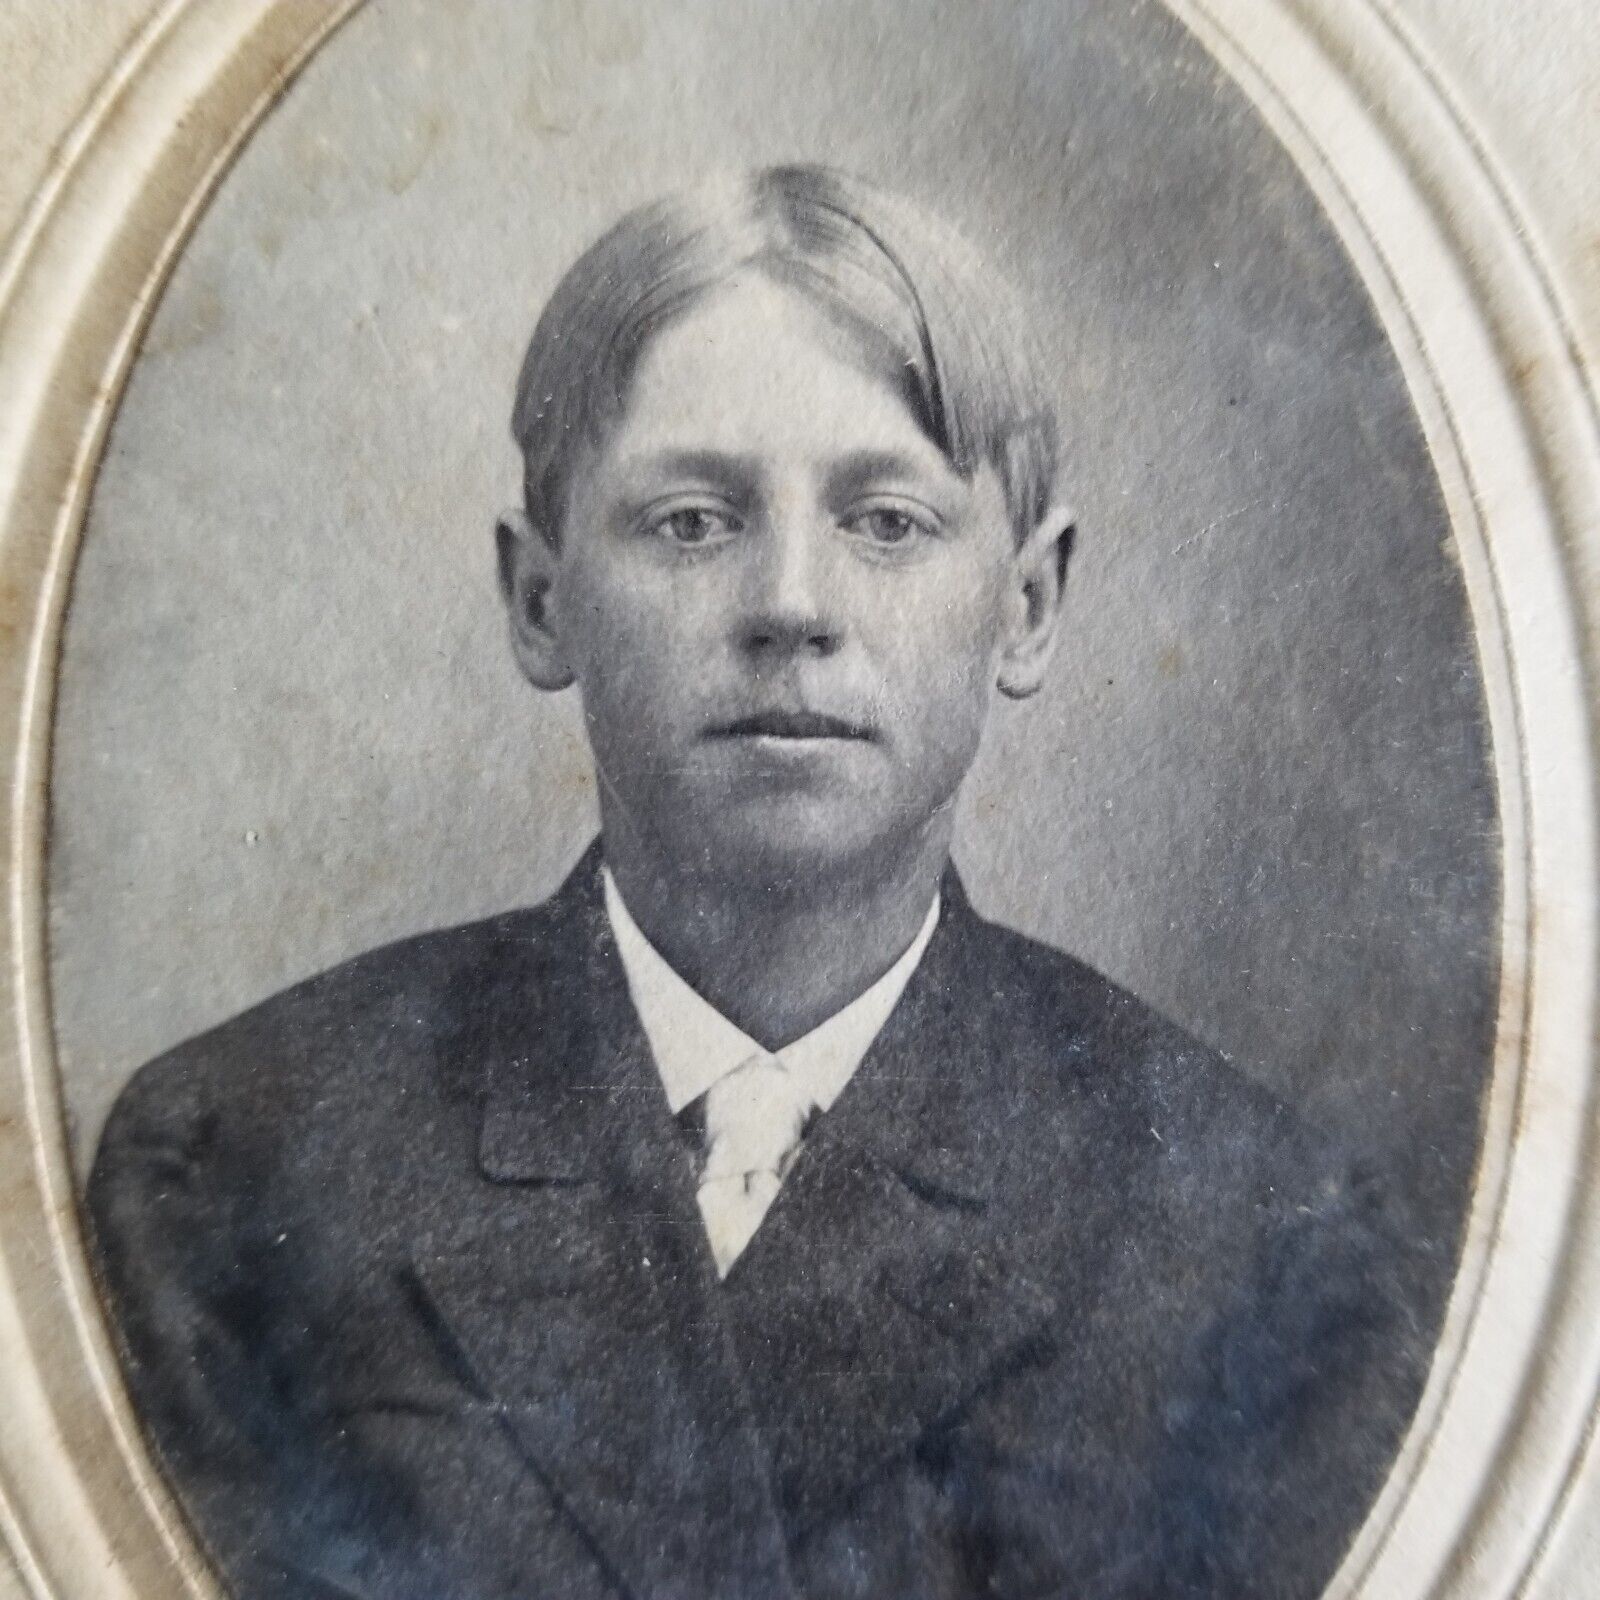 Antique Cabinet Card Young Man Teenager Photo Collins Card Blond Parted Hair Pin